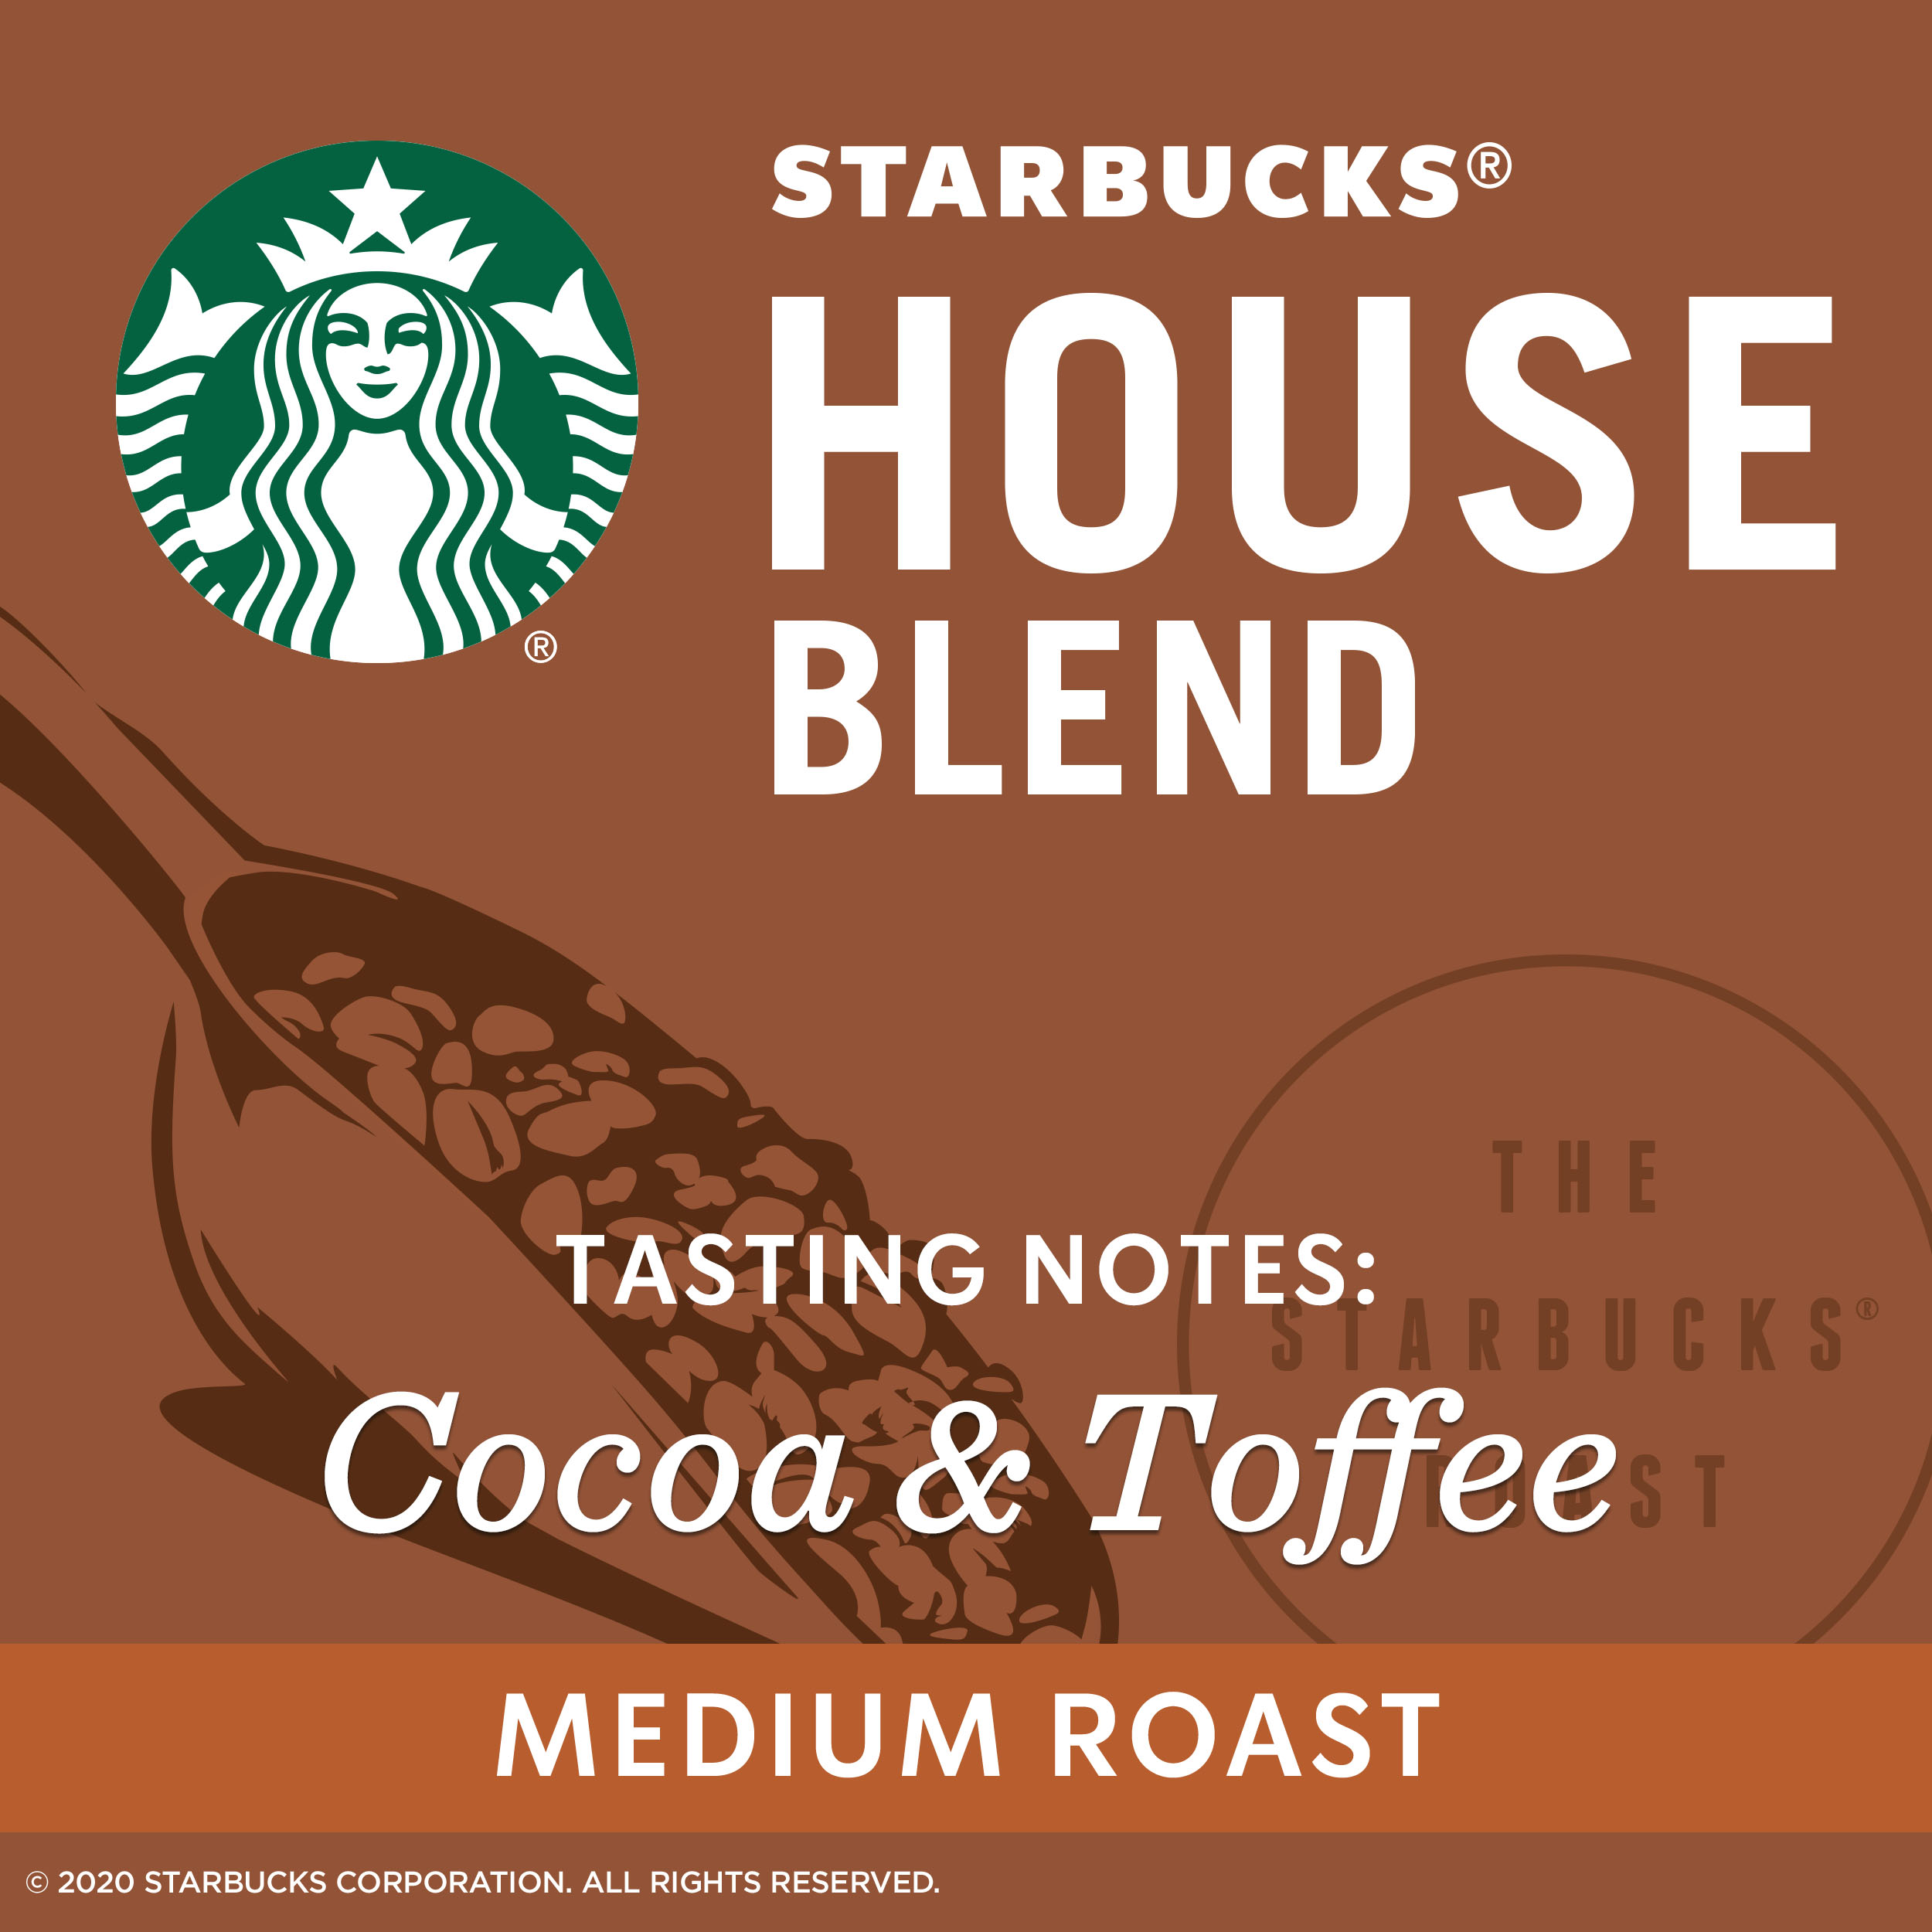 Starbucks Medium Roast K-Cup Coffee Pods — House Blend for Keurig Brewers — 1 box (16 pods) - image 3 of 6